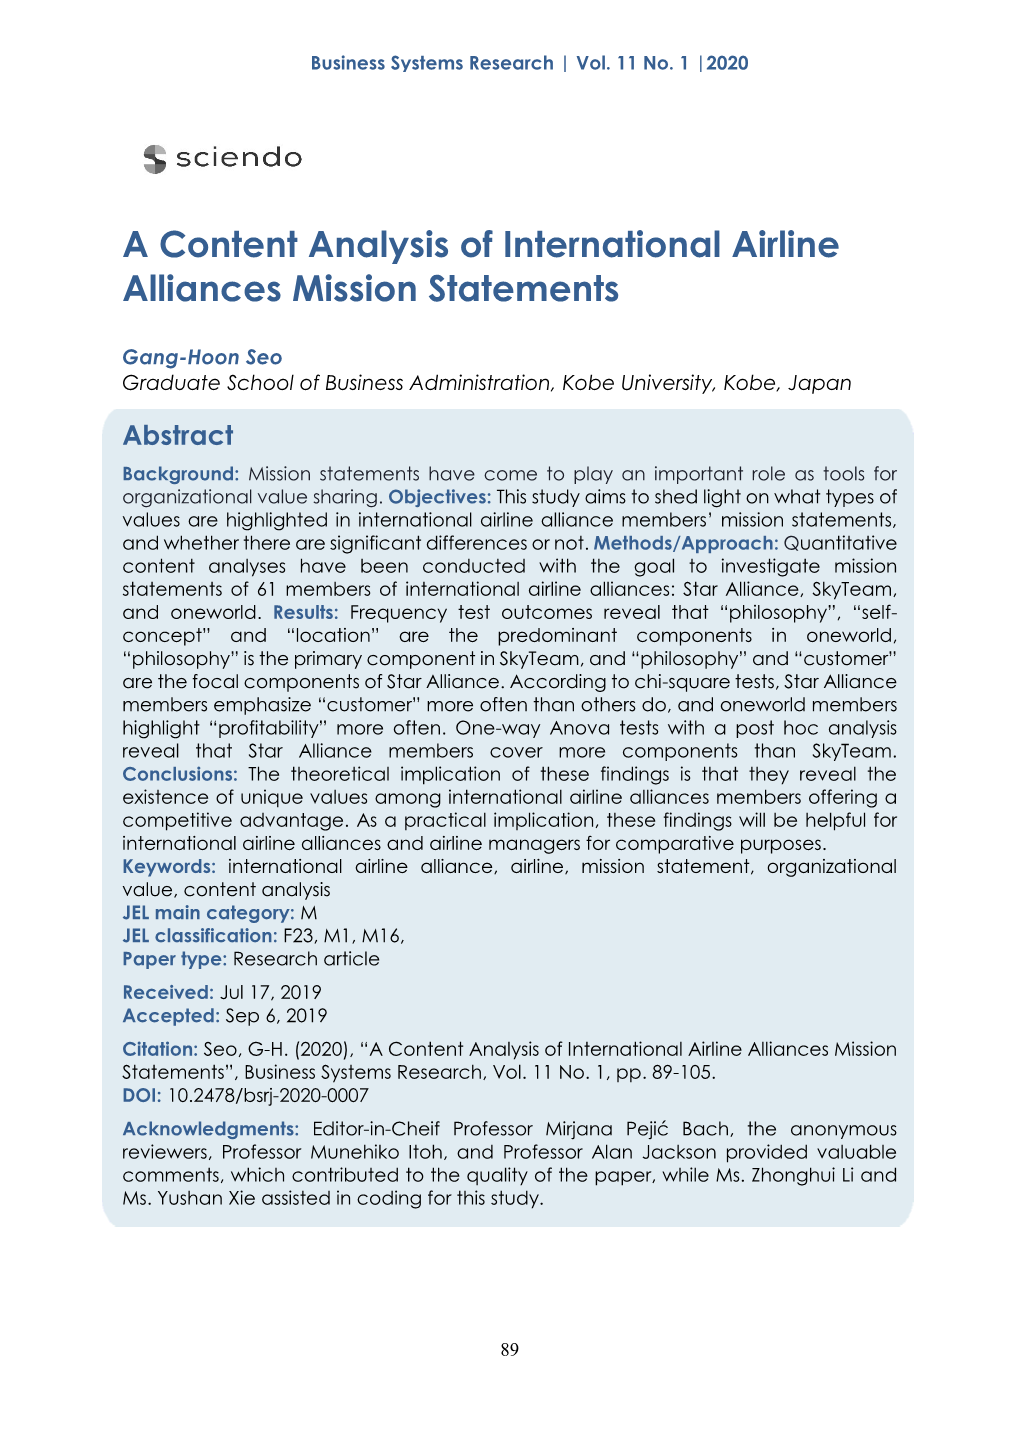 A Content Analysis of International Airline Alliances Mission Statements